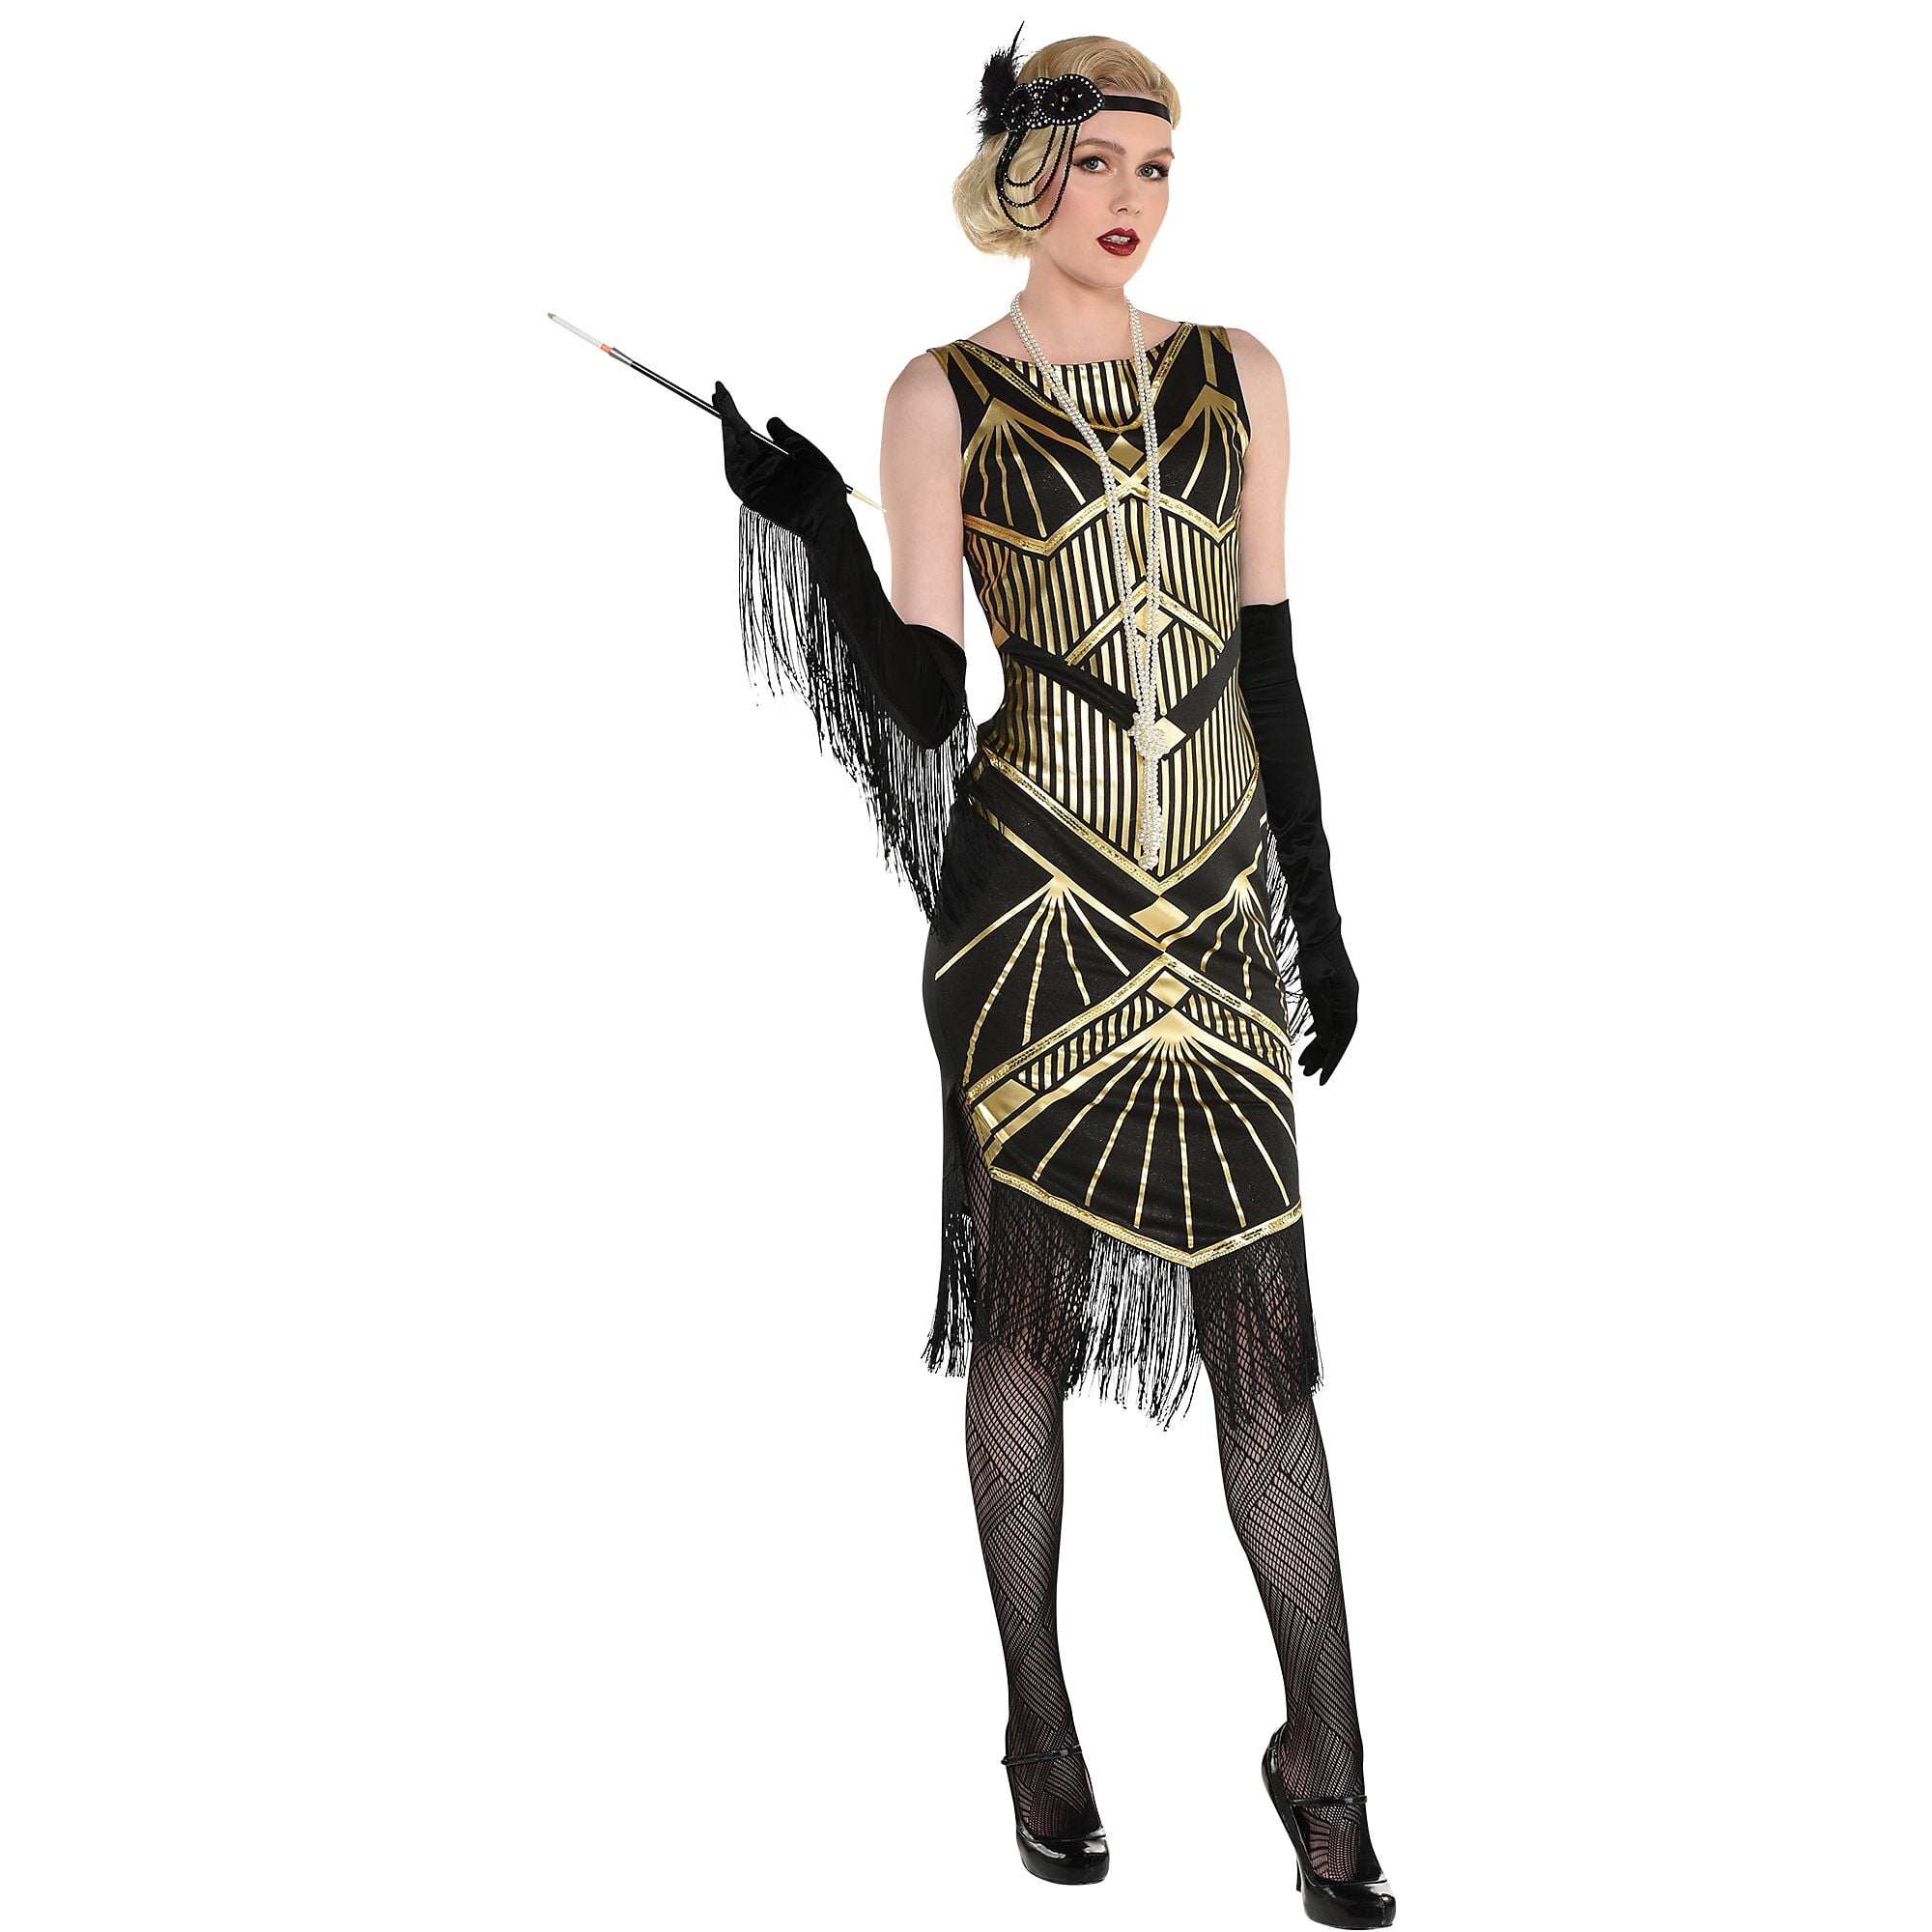 Party City Roaring 20s Flapper Girl Halloween Costume for Women, Black/Gold, Small, Includes Dress and Headband - Walmart.com